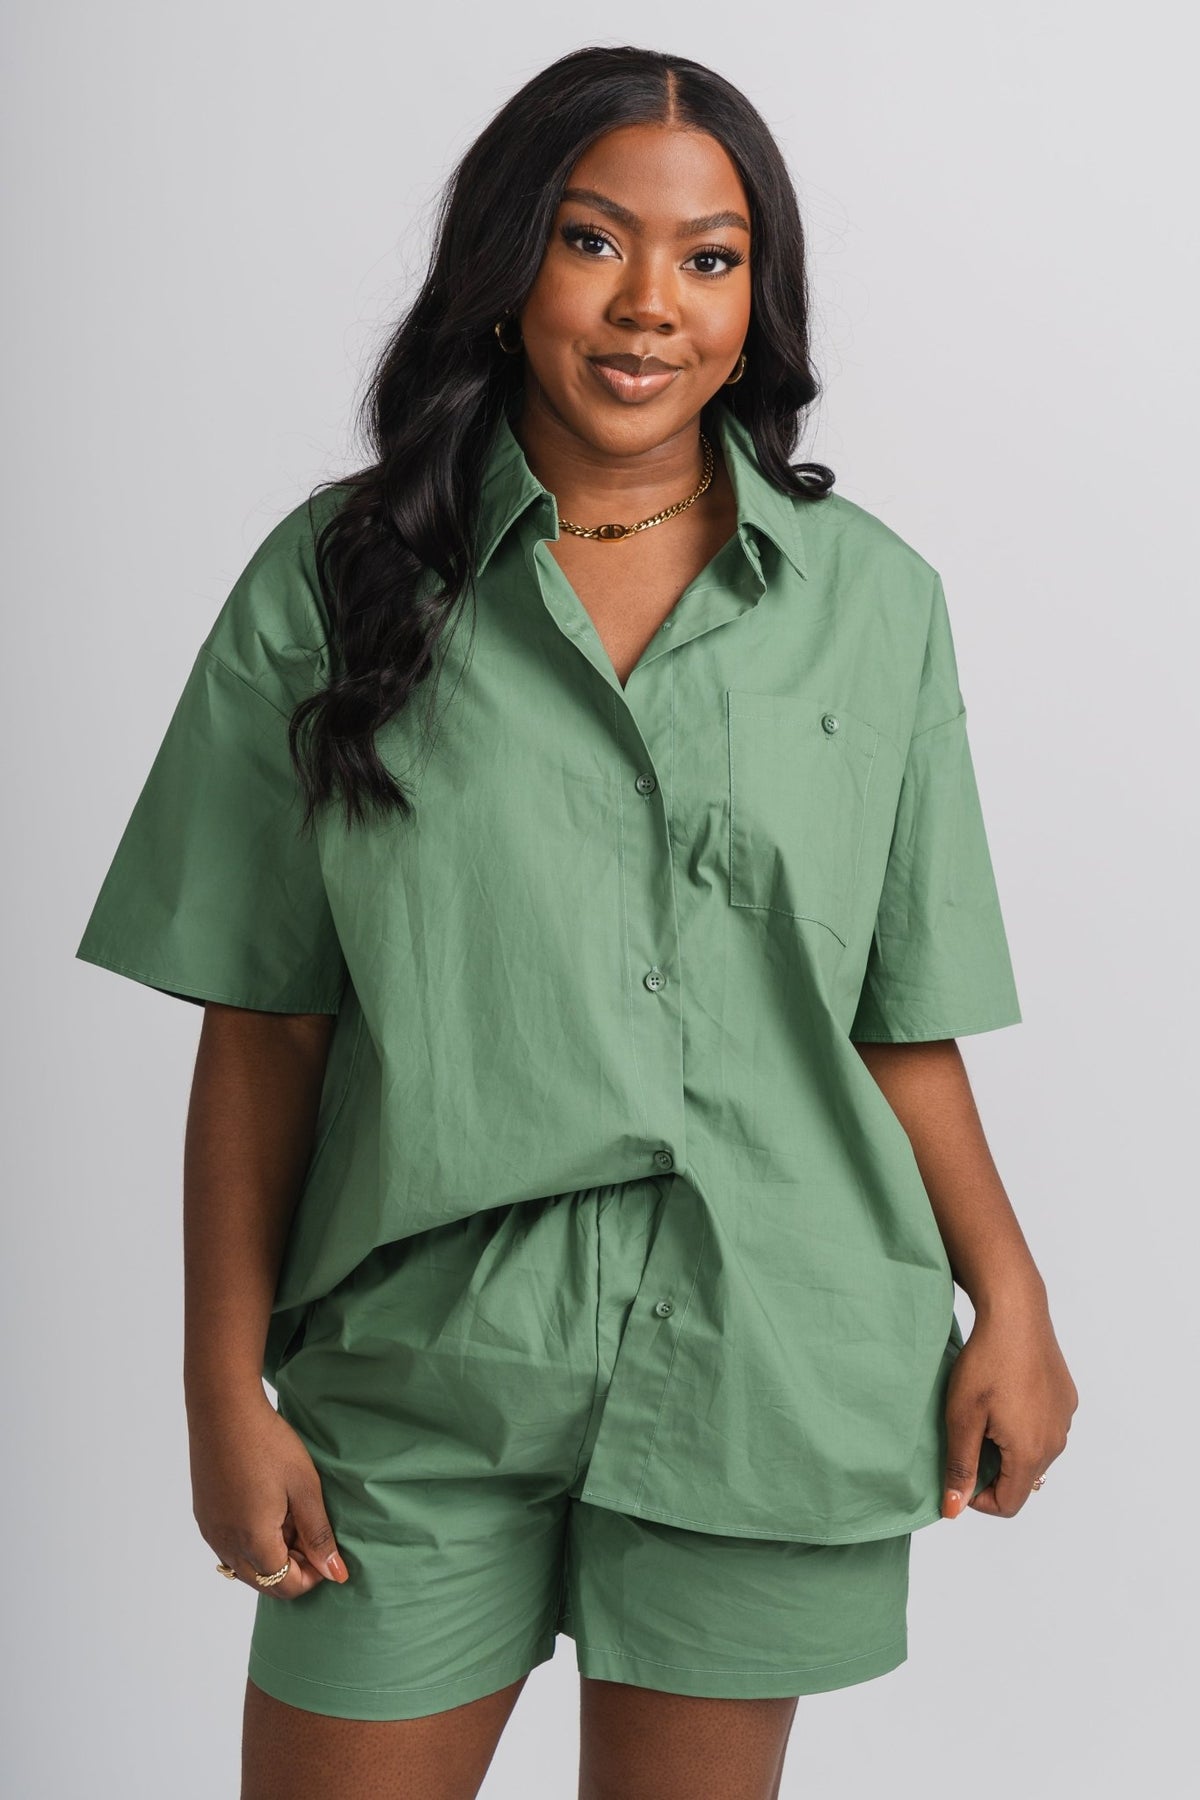 Oversized short sleeve button up top green - Trendy Top - Cute Loungewear Collection at Lush Fashion Lounge Boutique in Oklahoma City